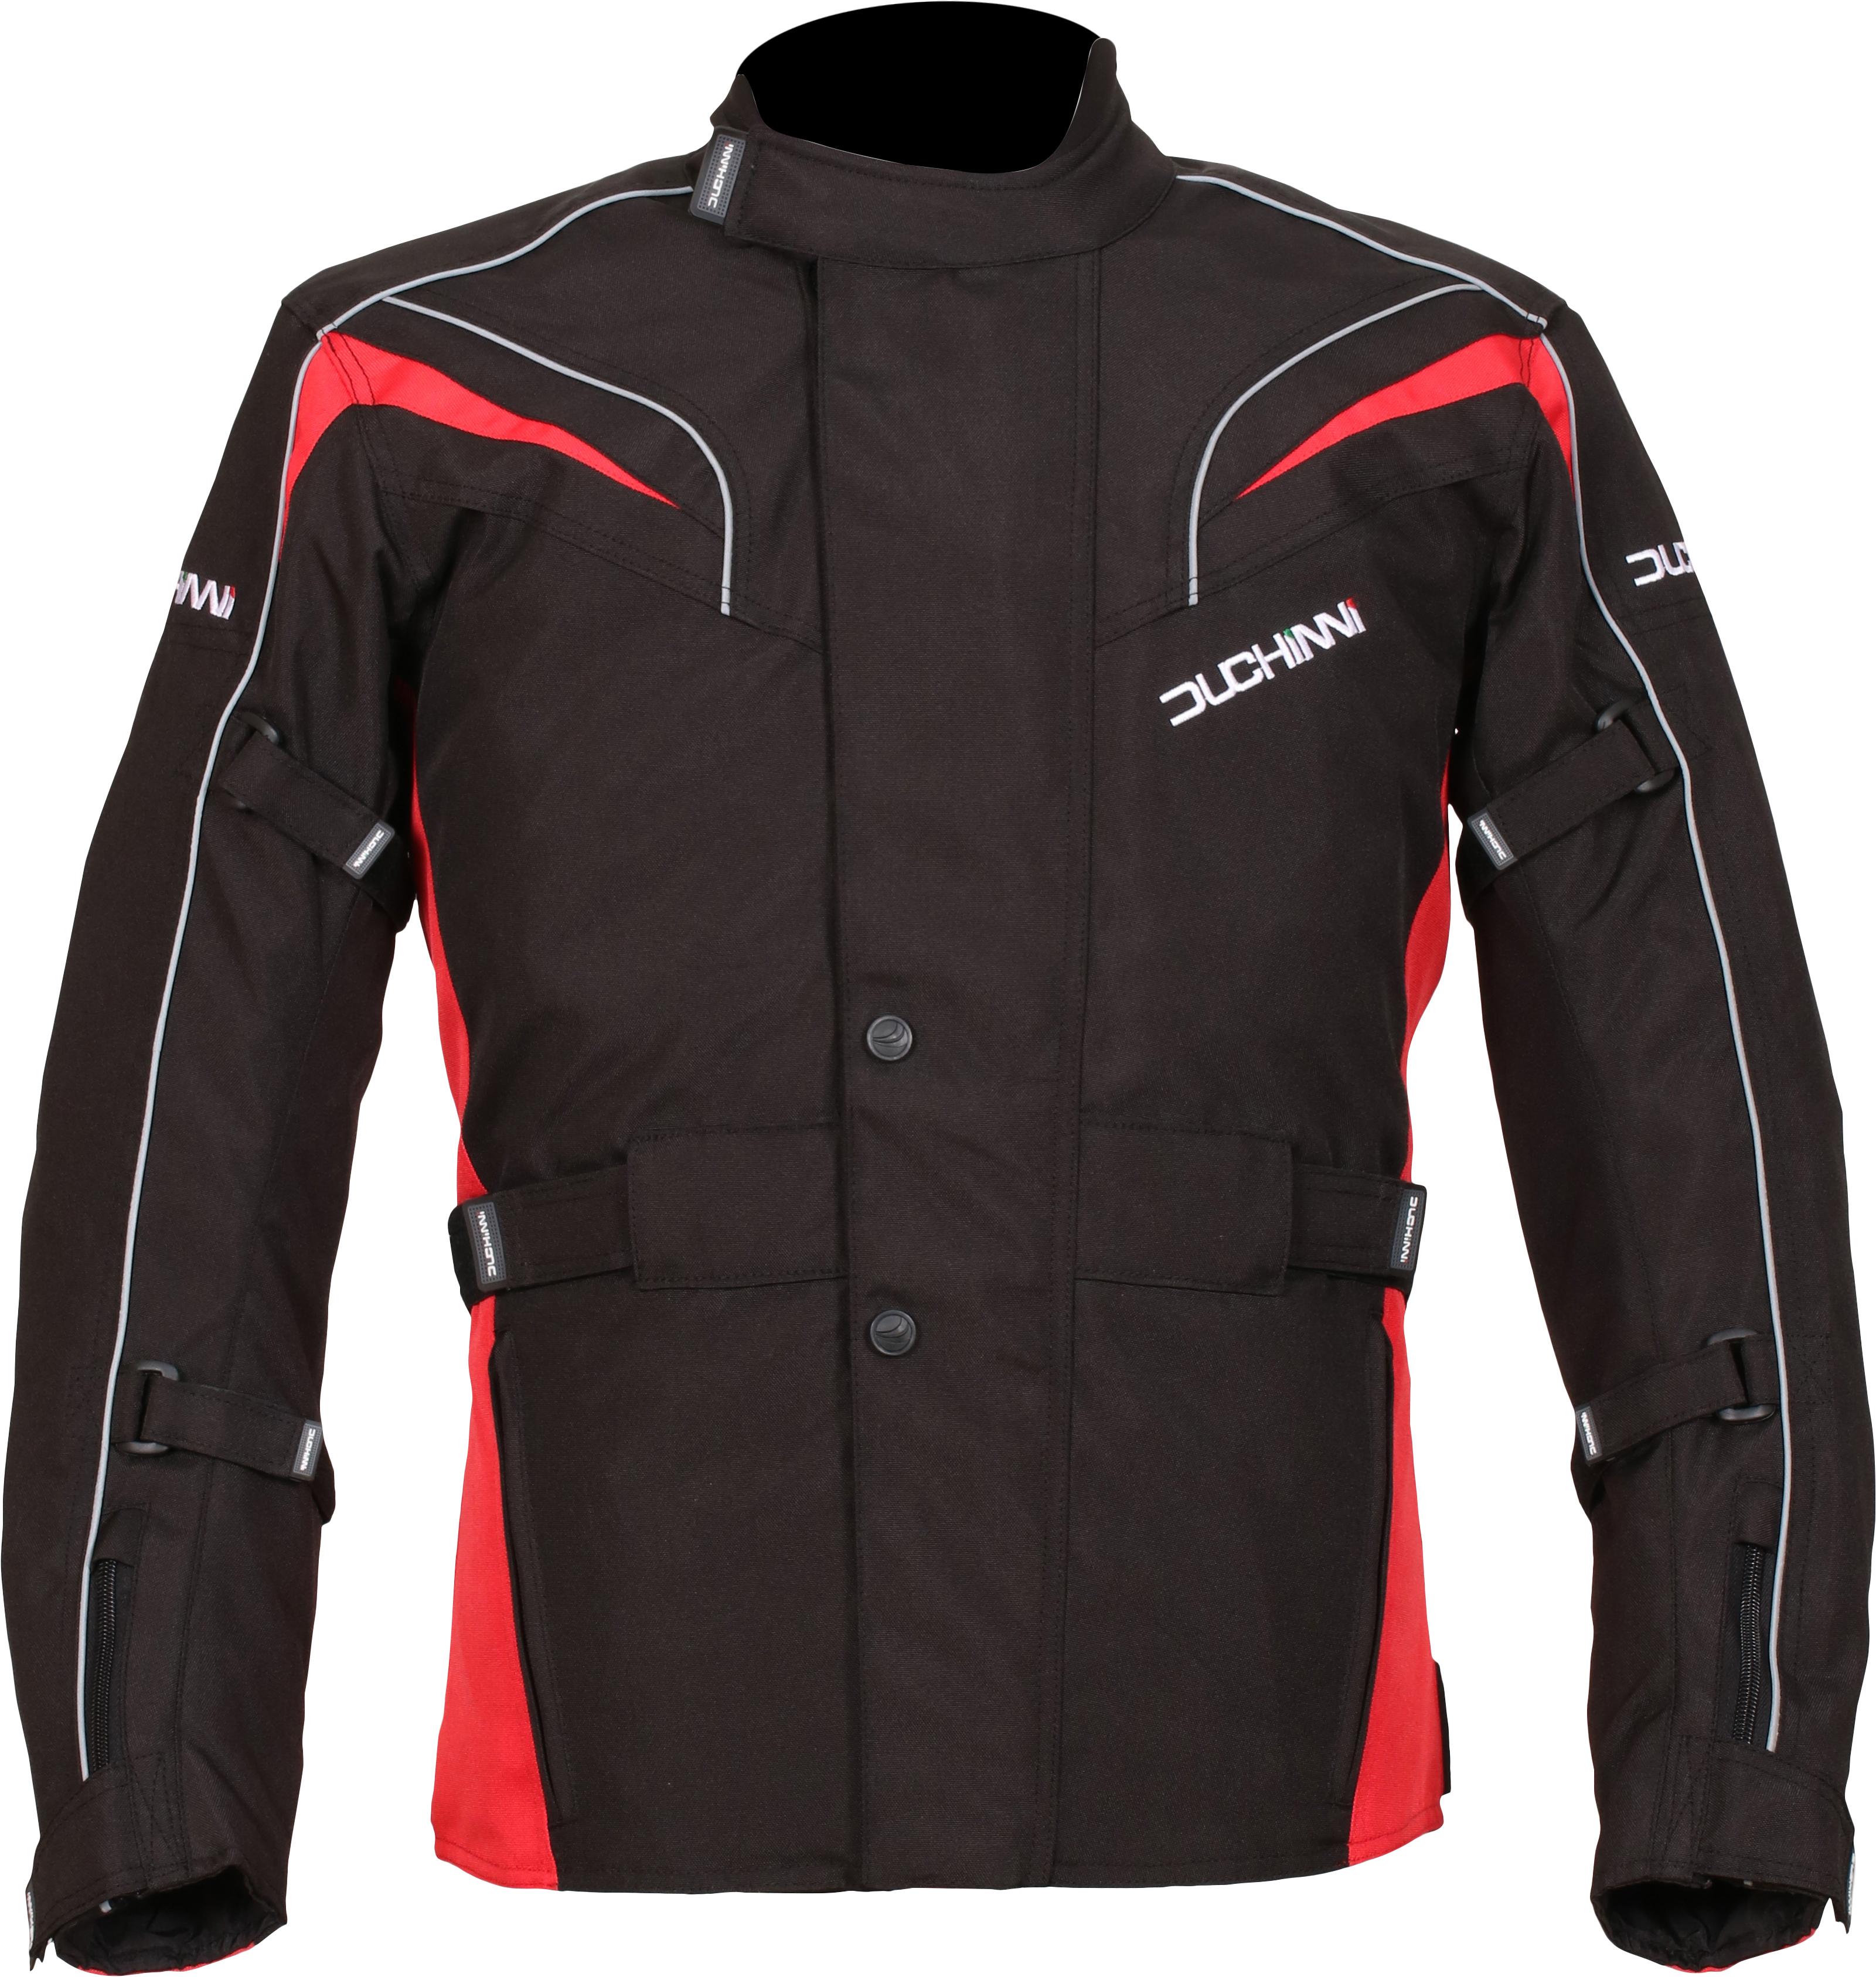 Duchinni Hurrican Motorcycle Jacket - Black And Red, S